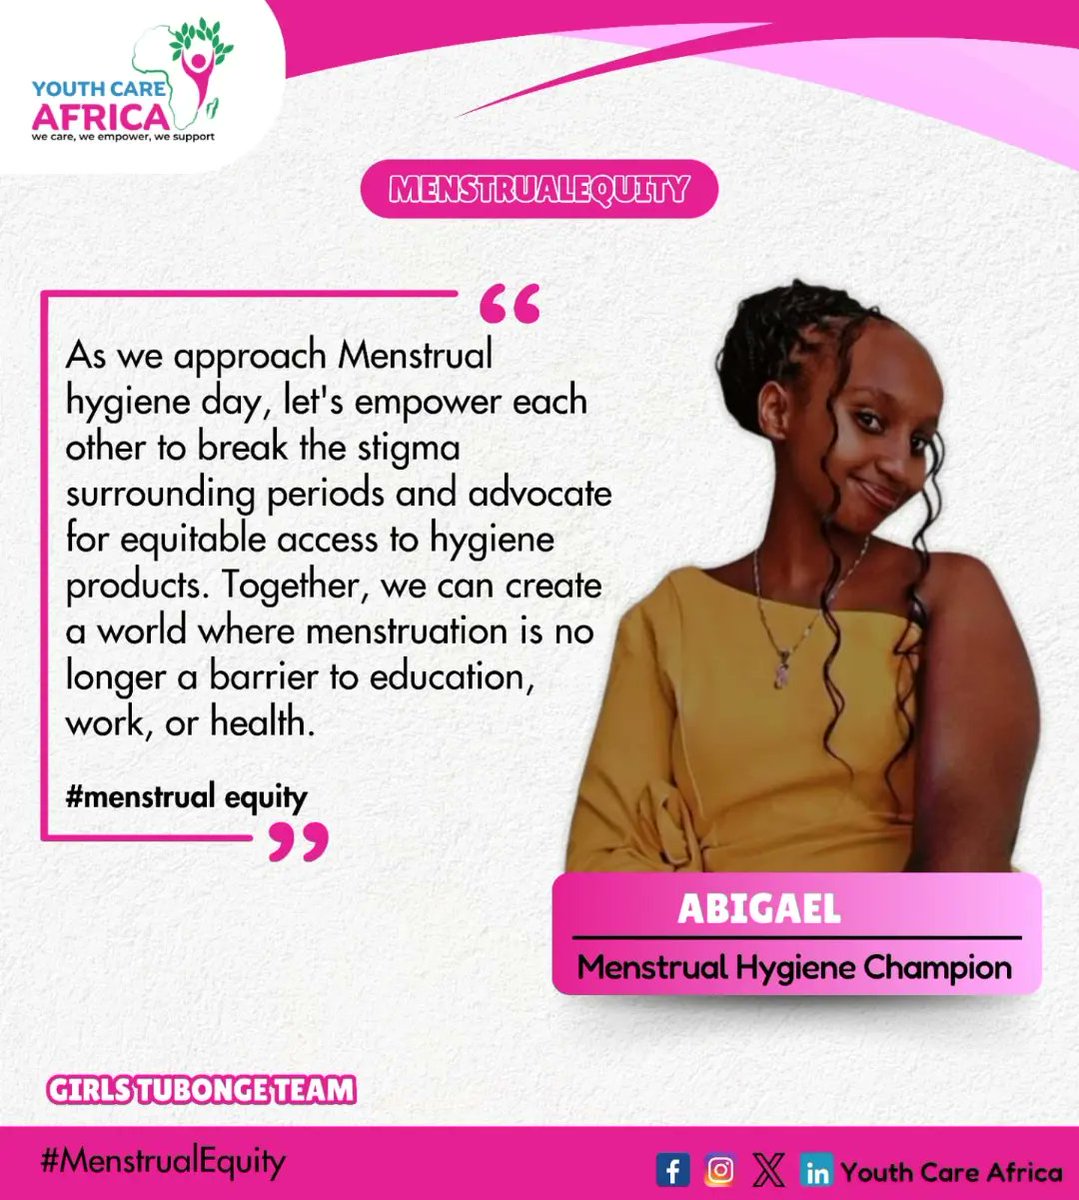 GIRLS TUBONGE TEAM: as the menstrual hygiene day nears, we amplify our voices on what we need to do to achieve menstrual equity by passing messages of hope
#menstruationmatters #menstrualeducation #menstrualhygieneday